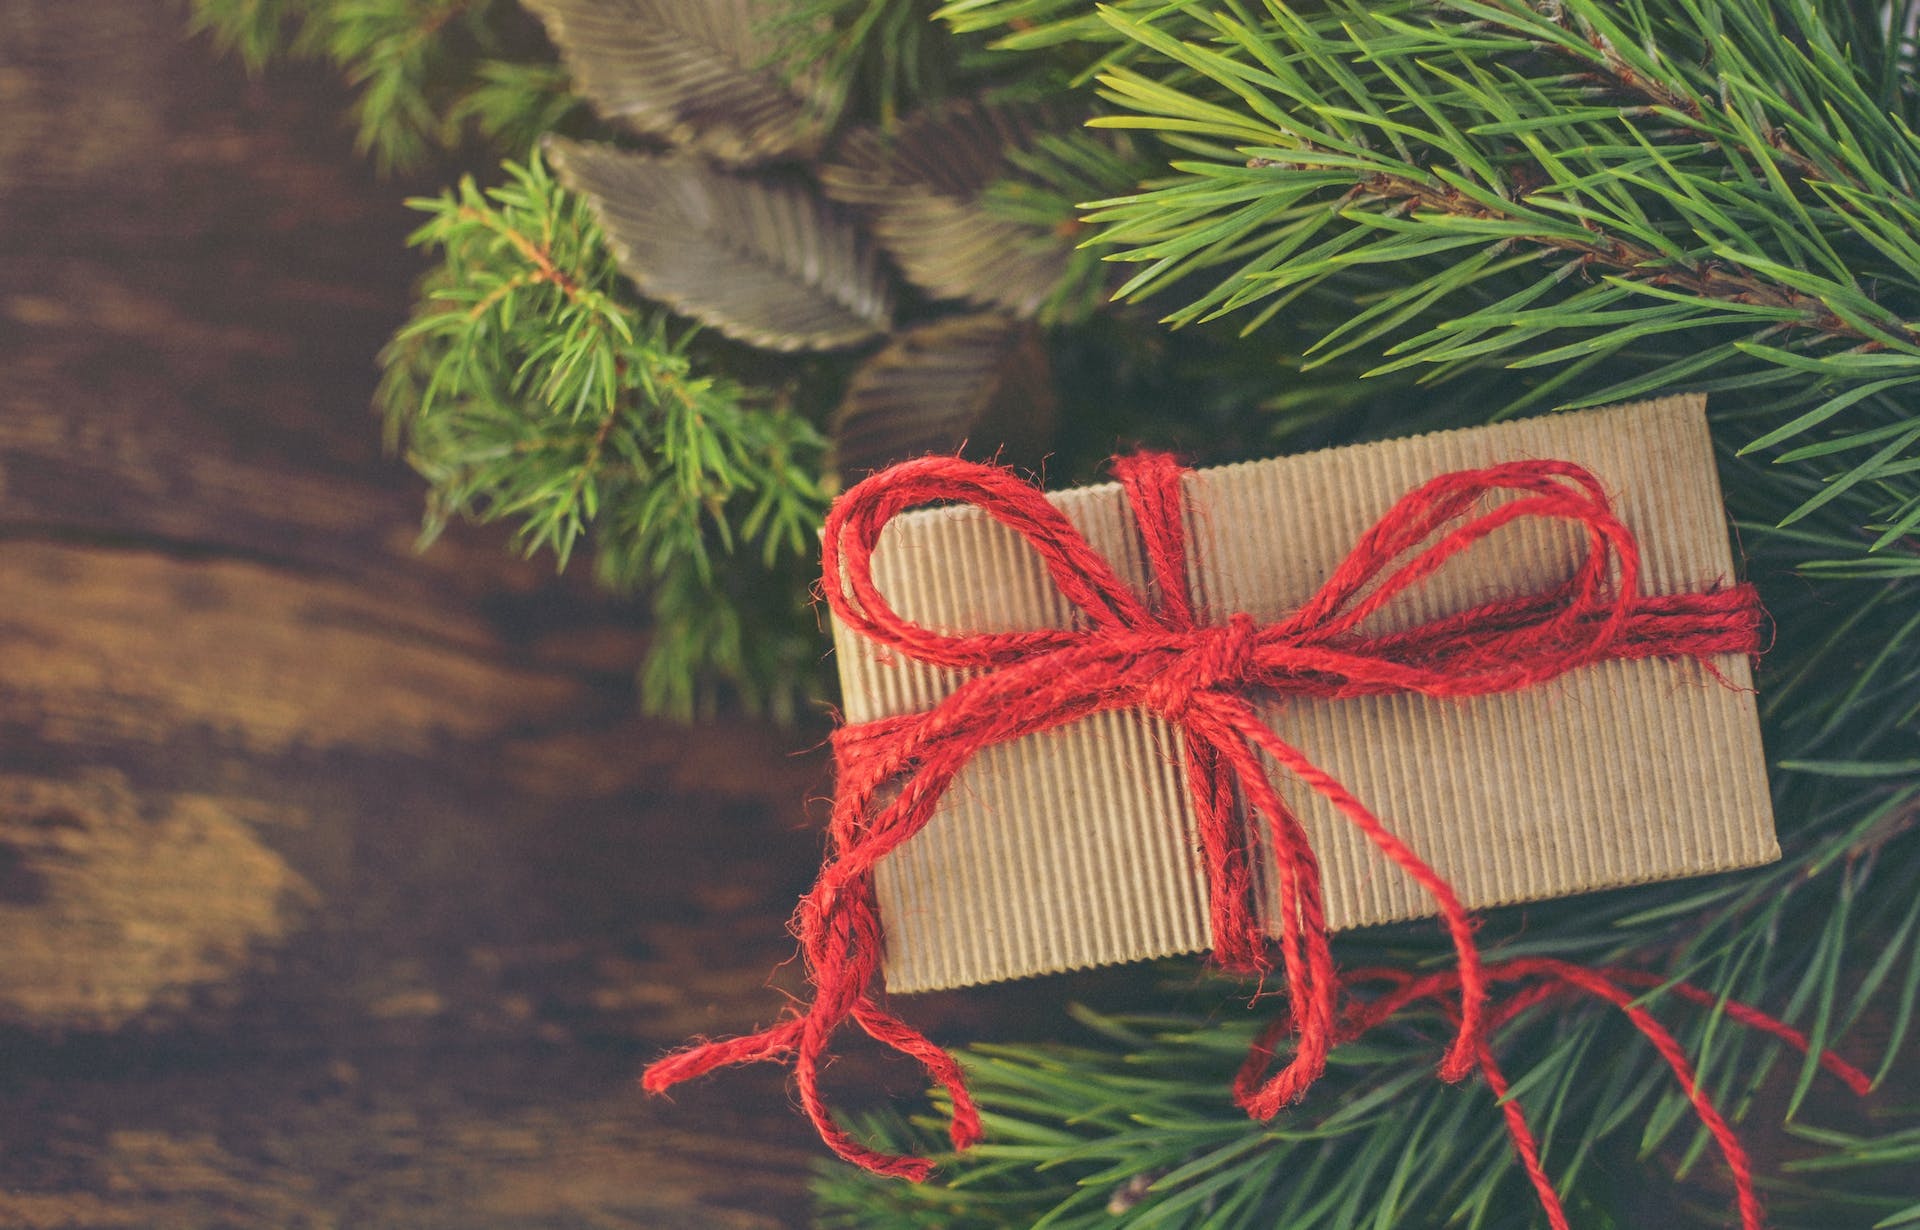 Christmas present wrapped with red thread | Source: Pexels